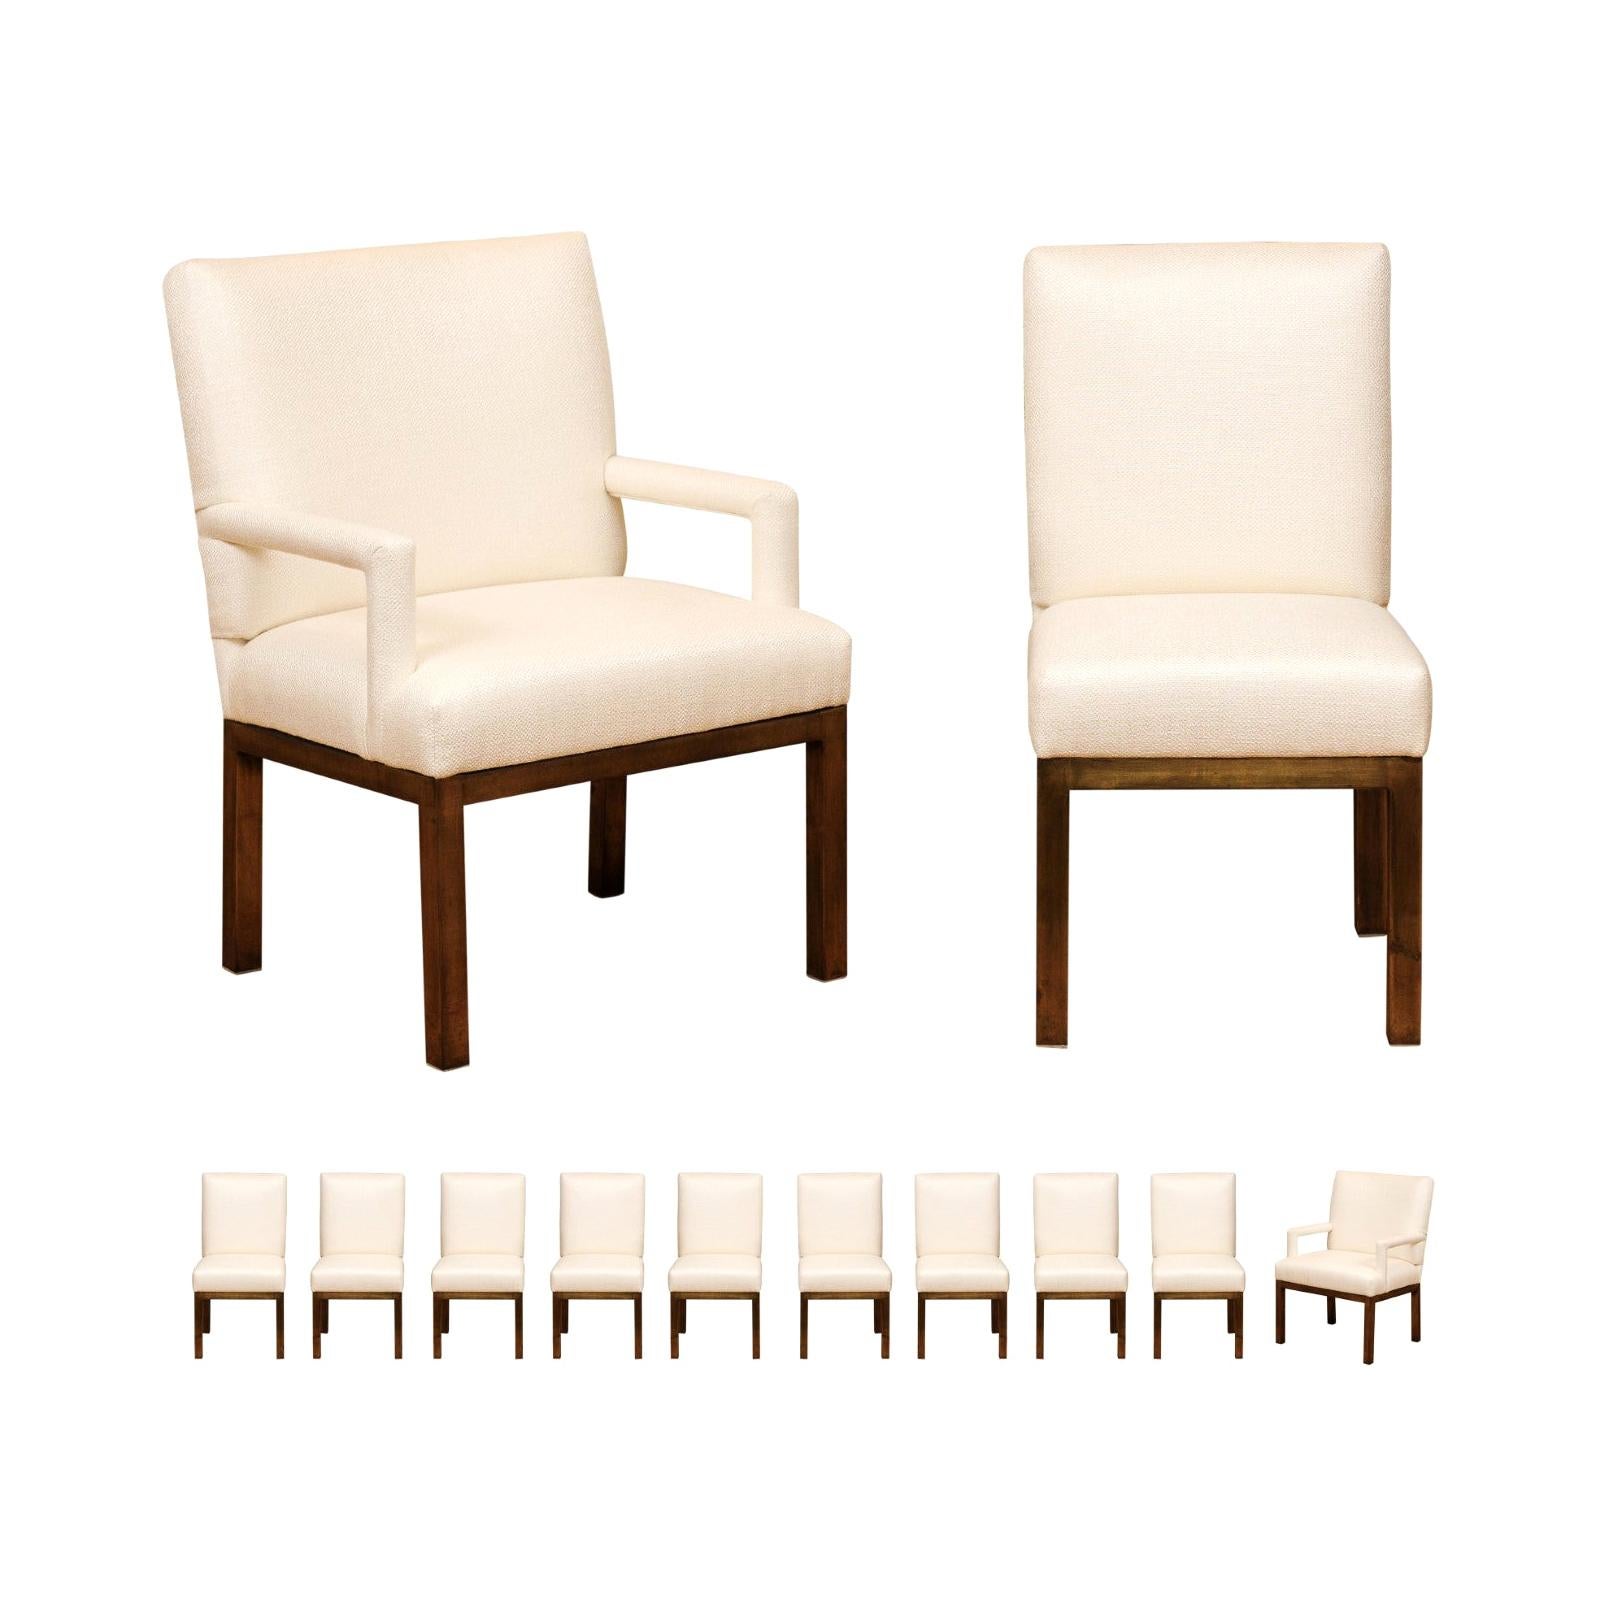 Chic Restored Set of 12 Brass Parsons Dining Chairs by John Stuart, circa 1968 For Sale